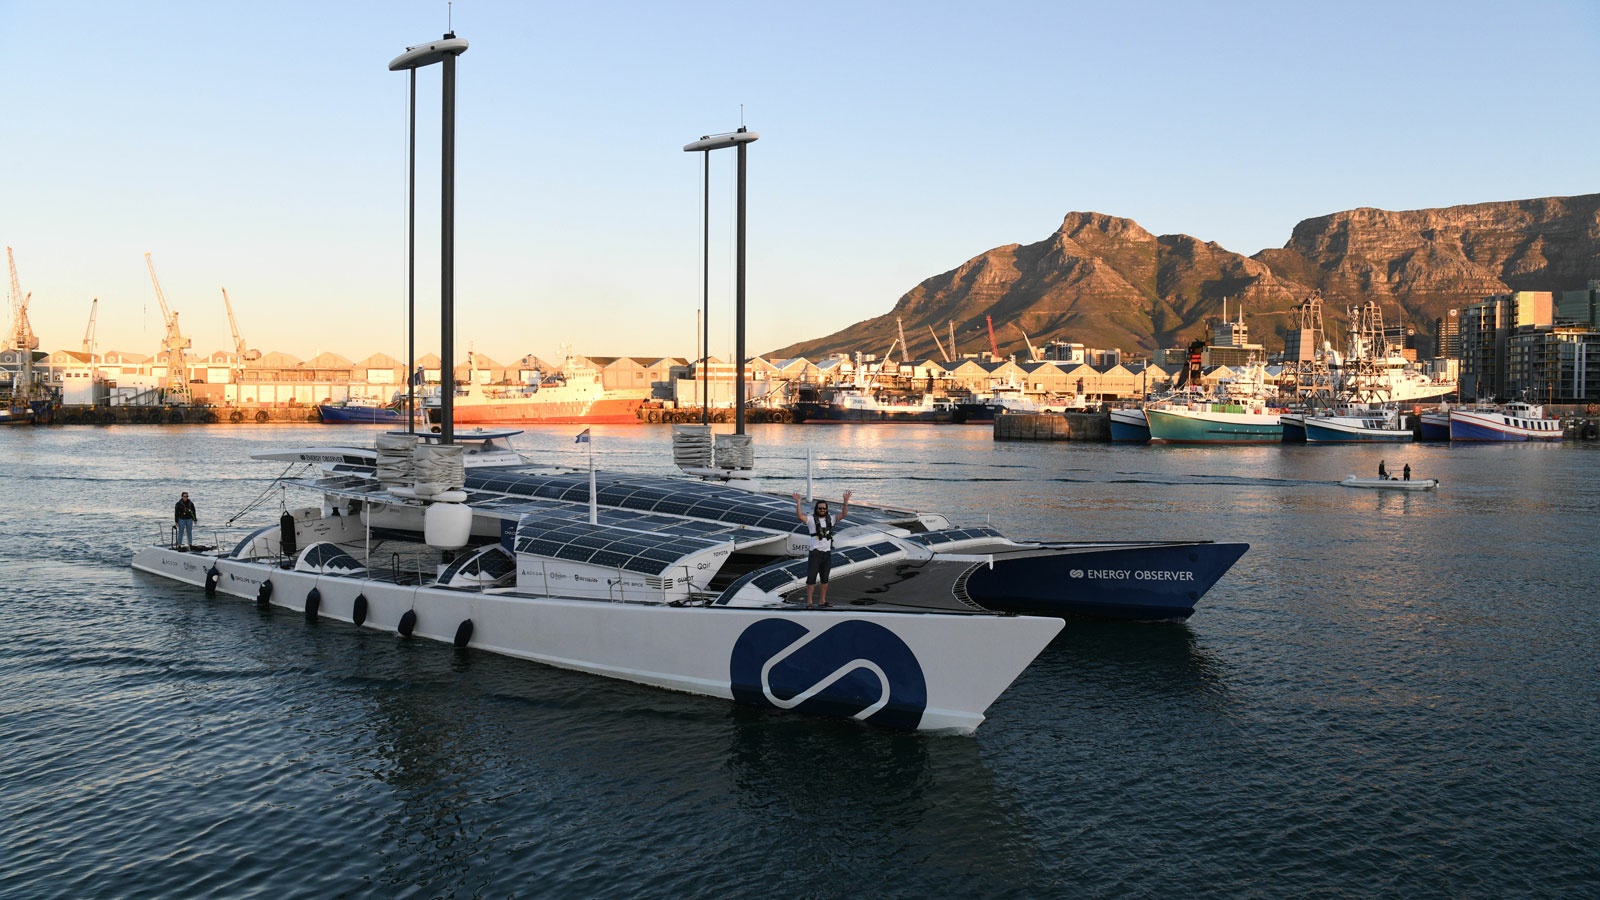 Zero-emission Energy Observer nears the end of its voyage after seven years